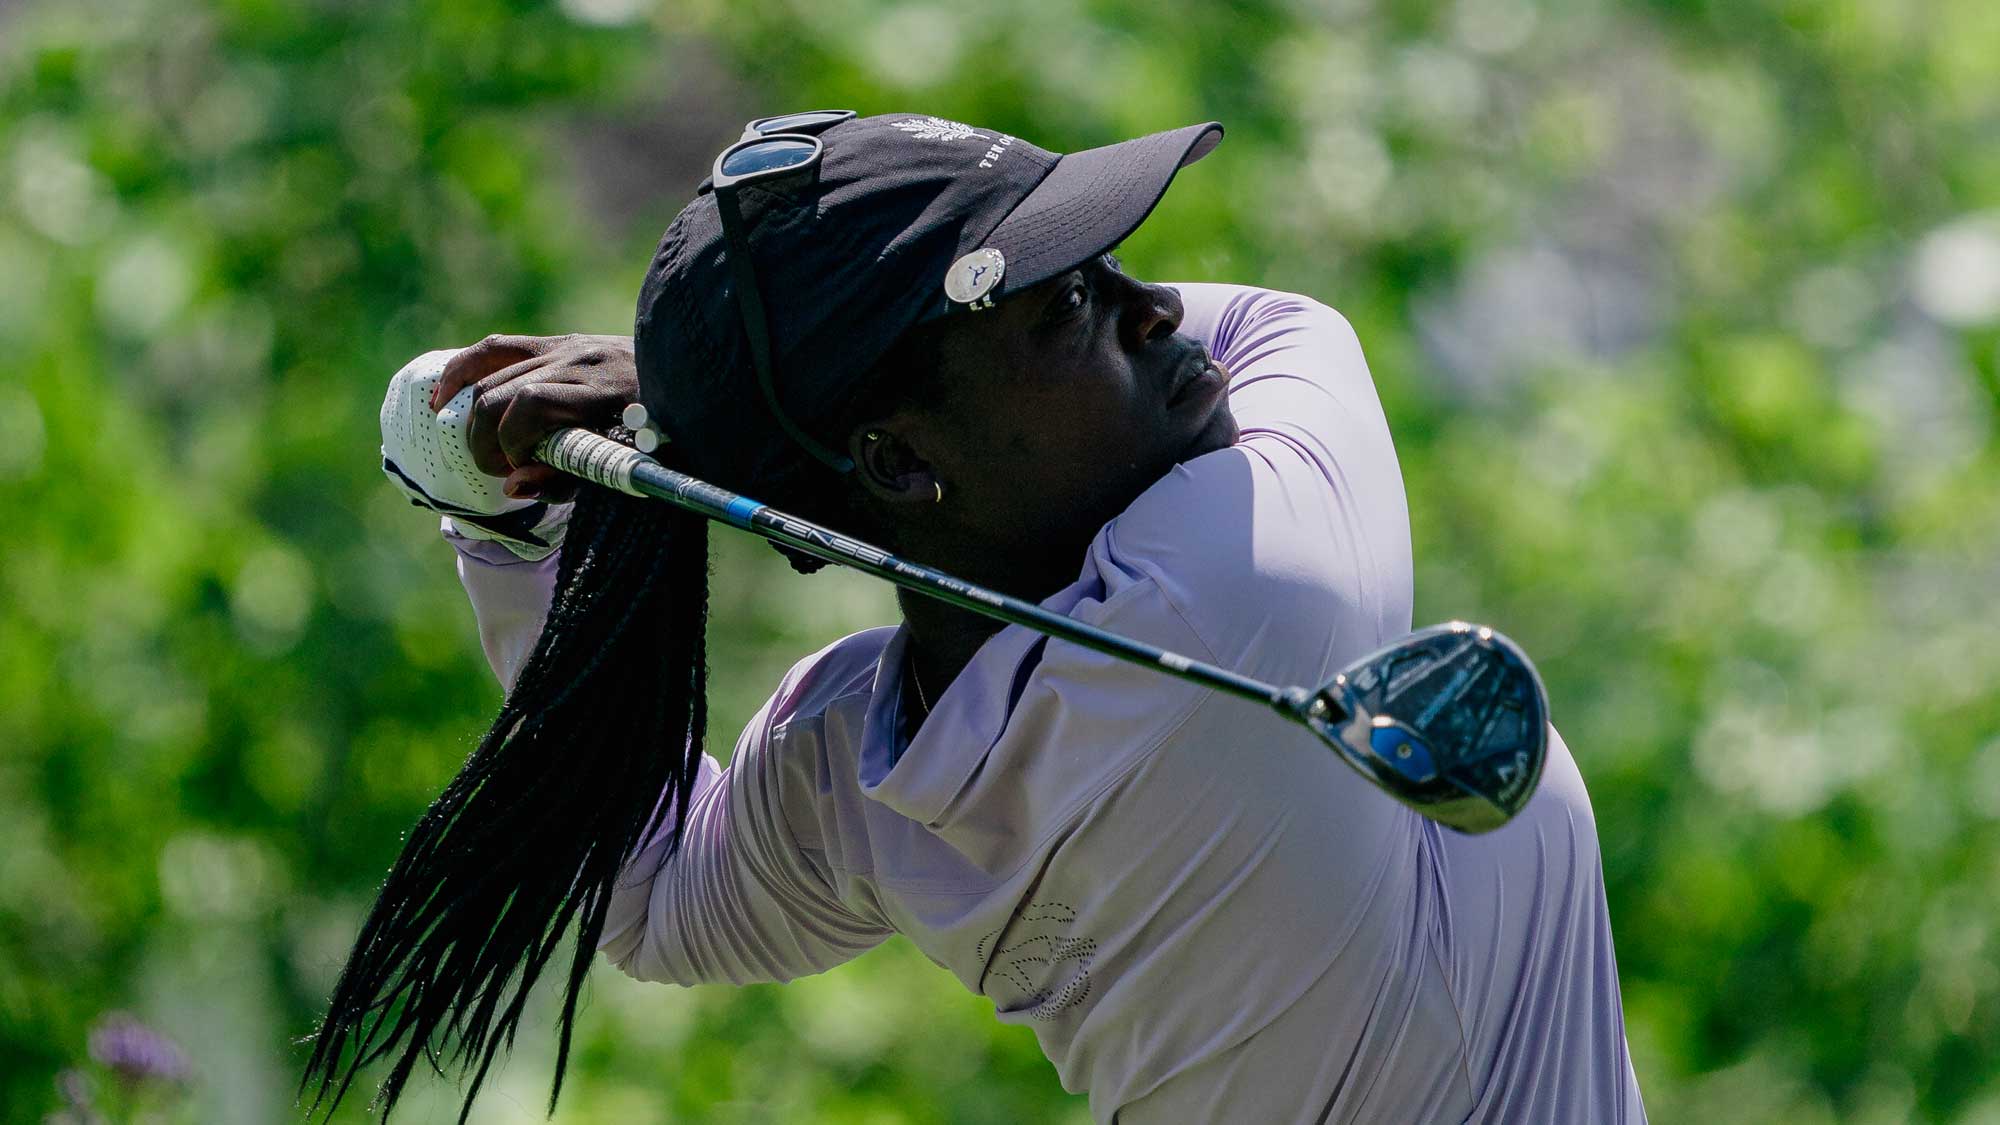 Lakareber Abe during the second round of the Hartford HealthCare Women’s Championship